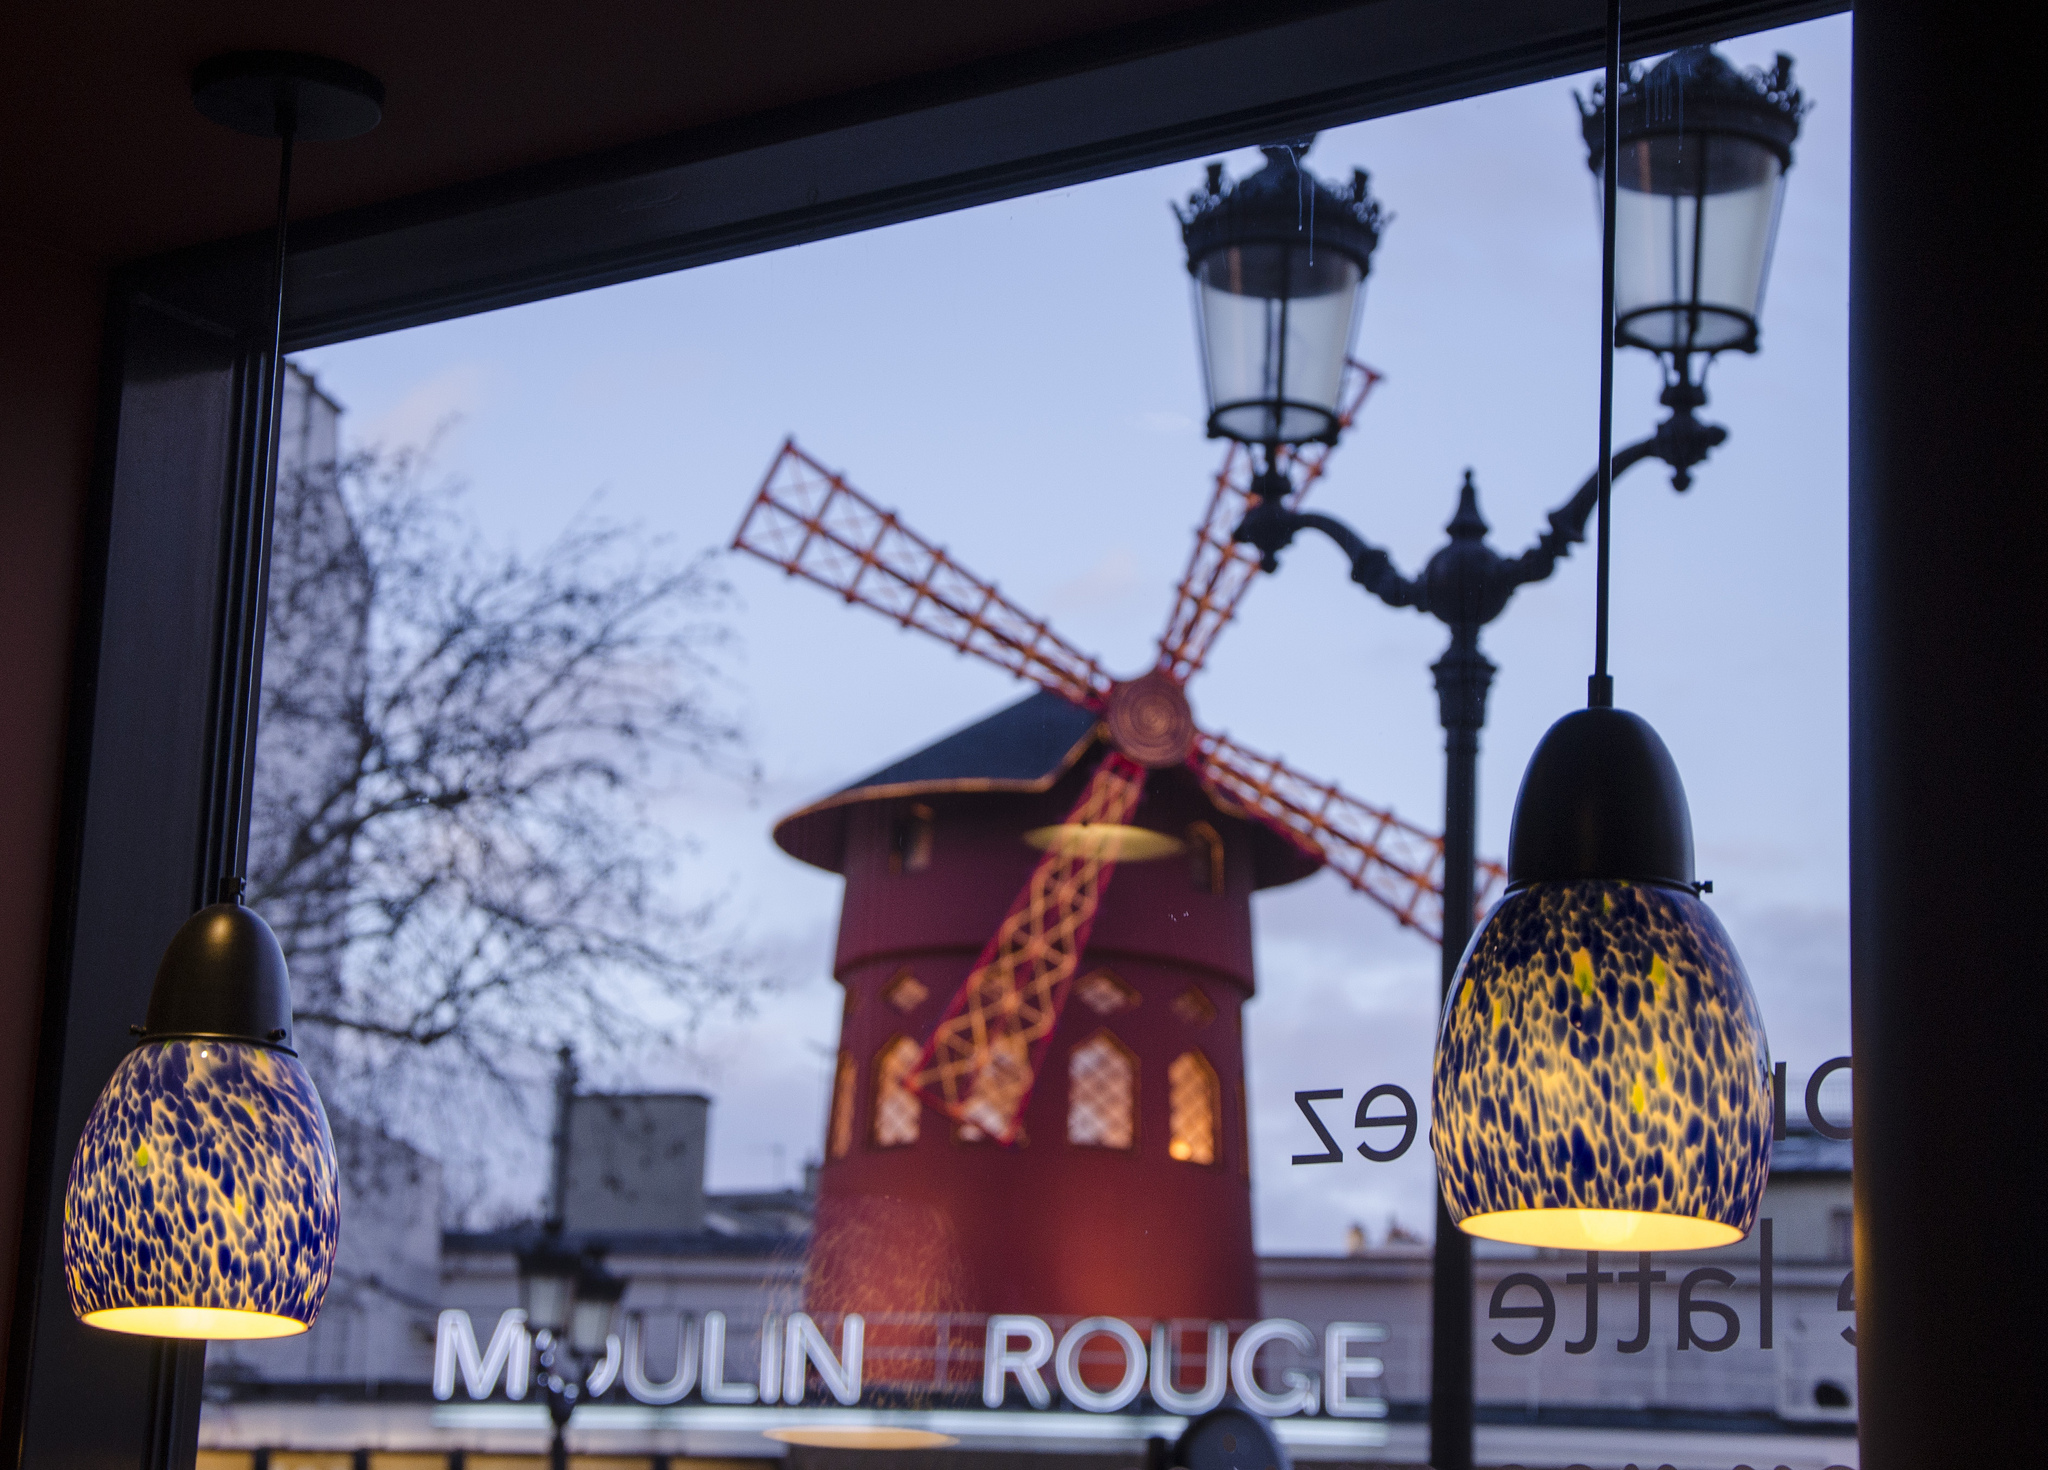 Moulin rouge...